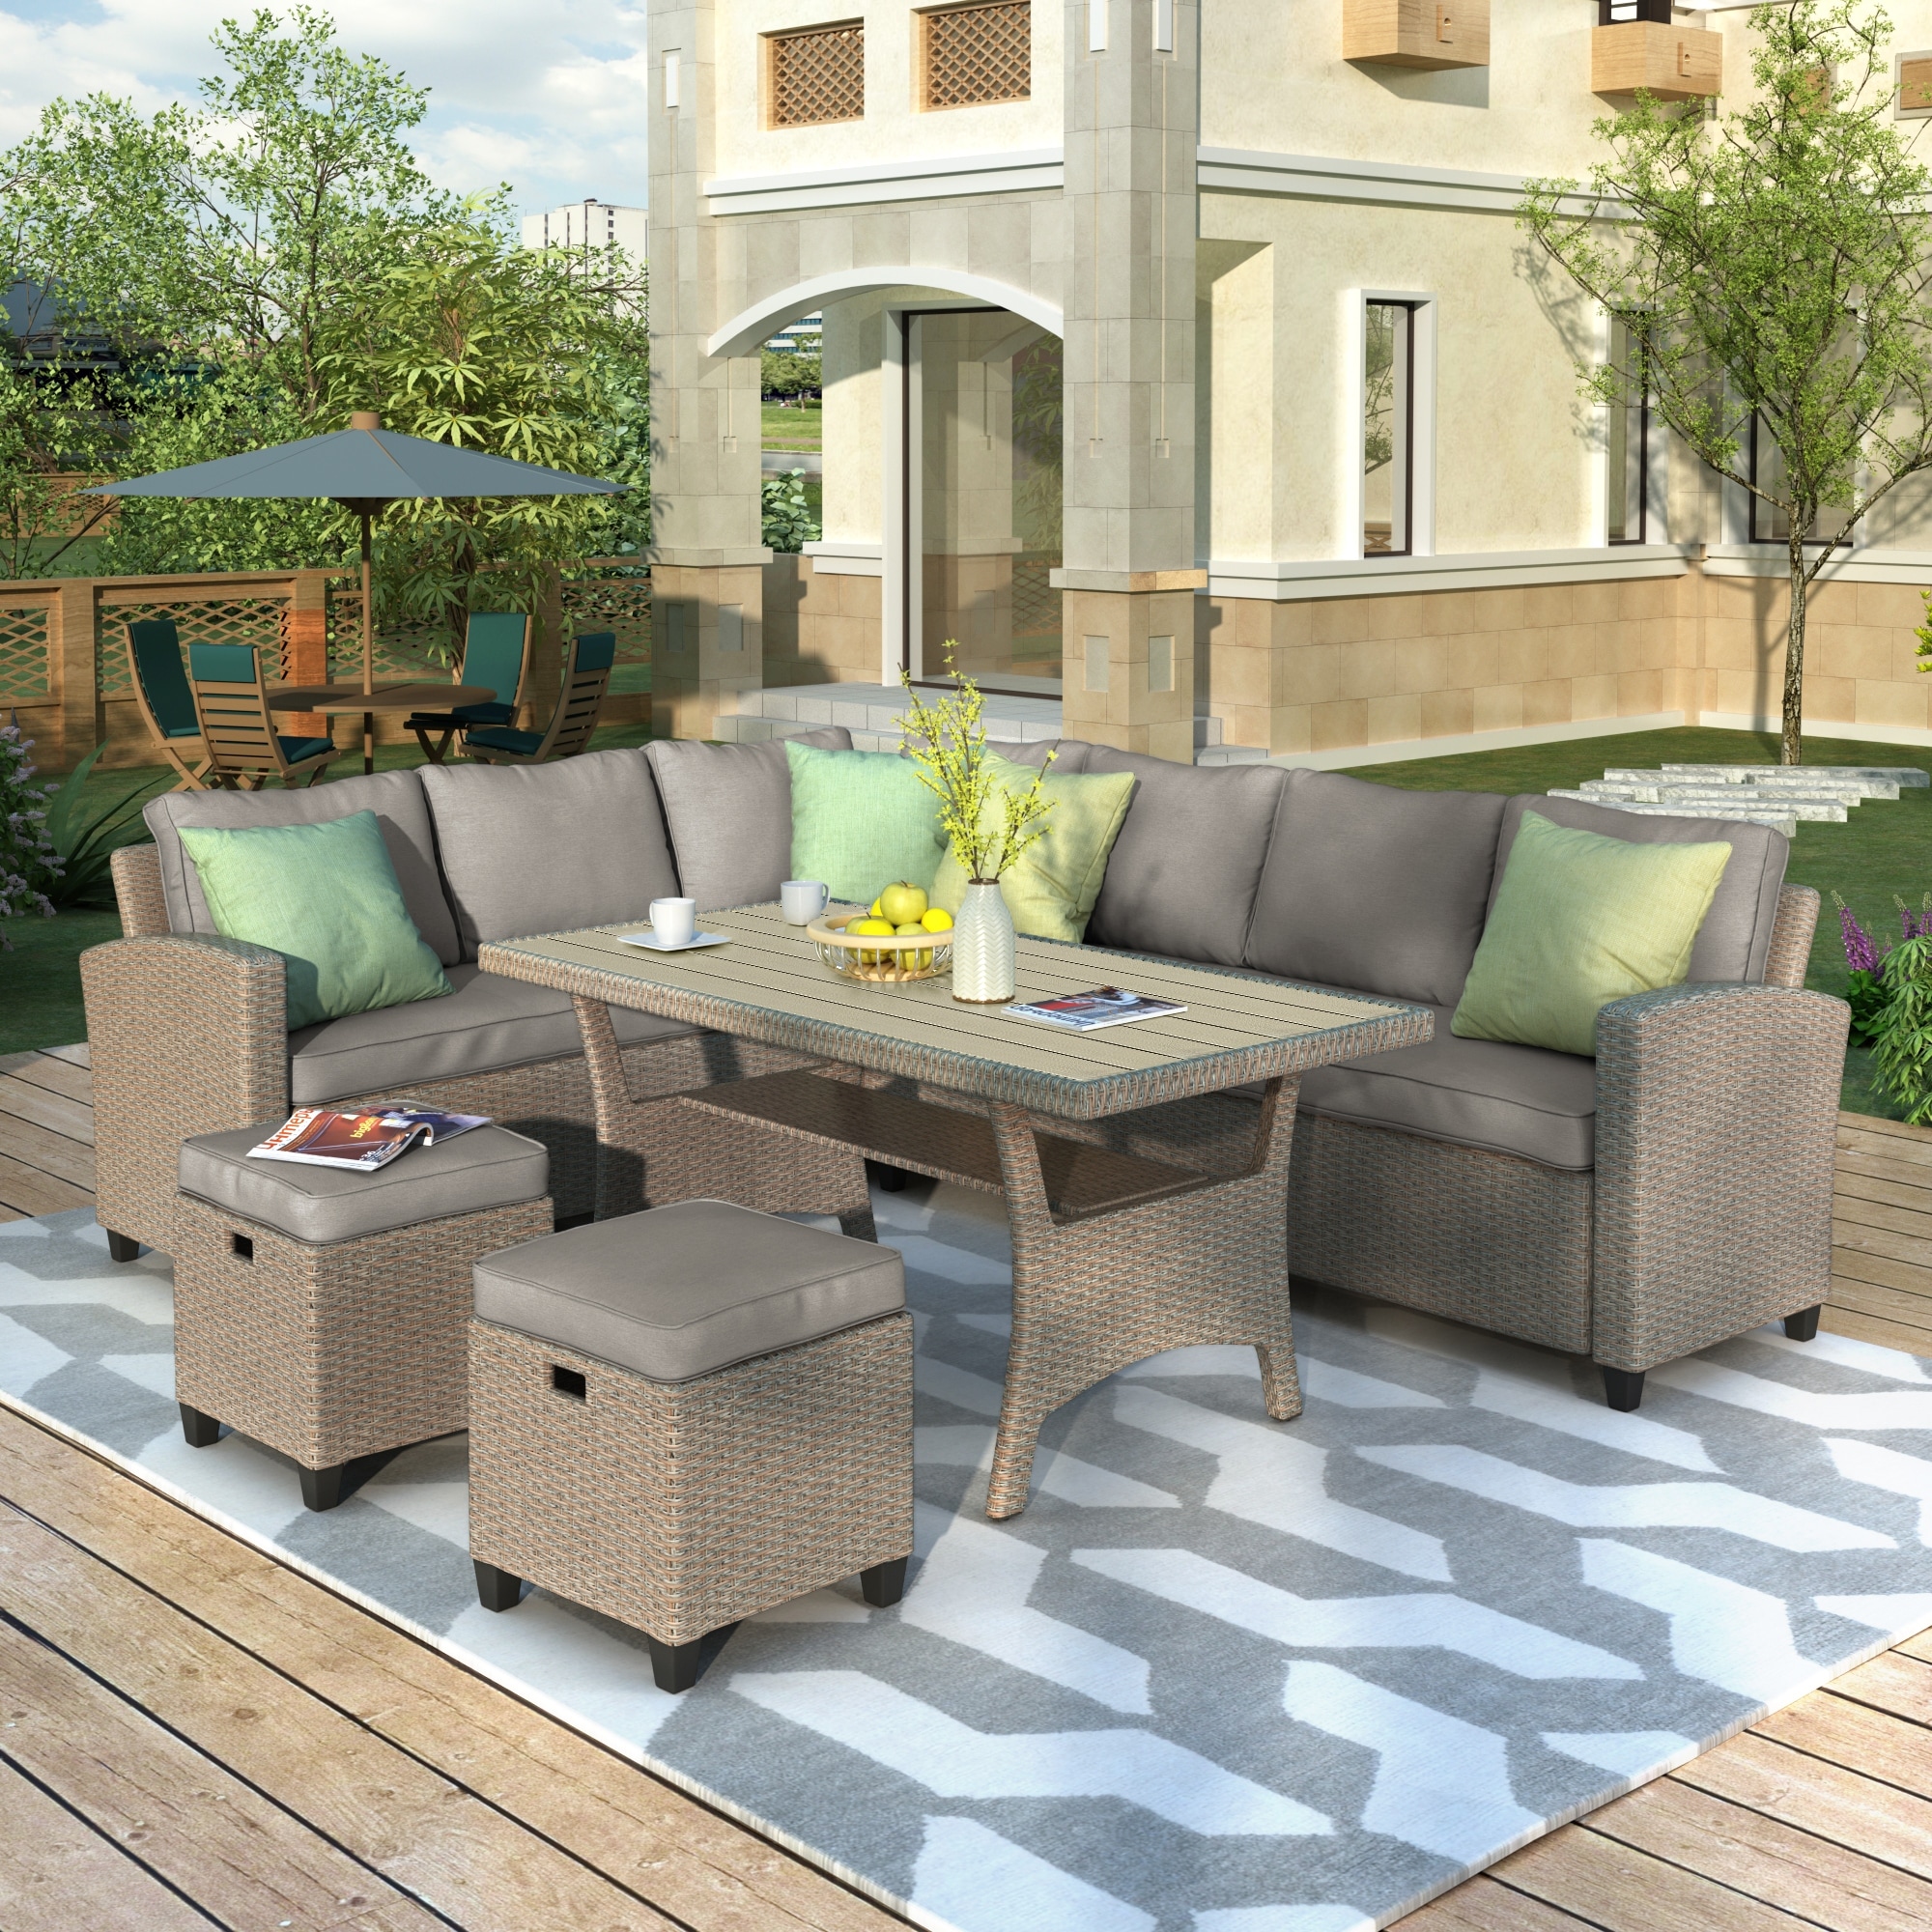 5 Piece Patio Furniture Set  Weatherproof Resin Wicker With Steel Frame  Thickened Cushioning And Lumbar Support